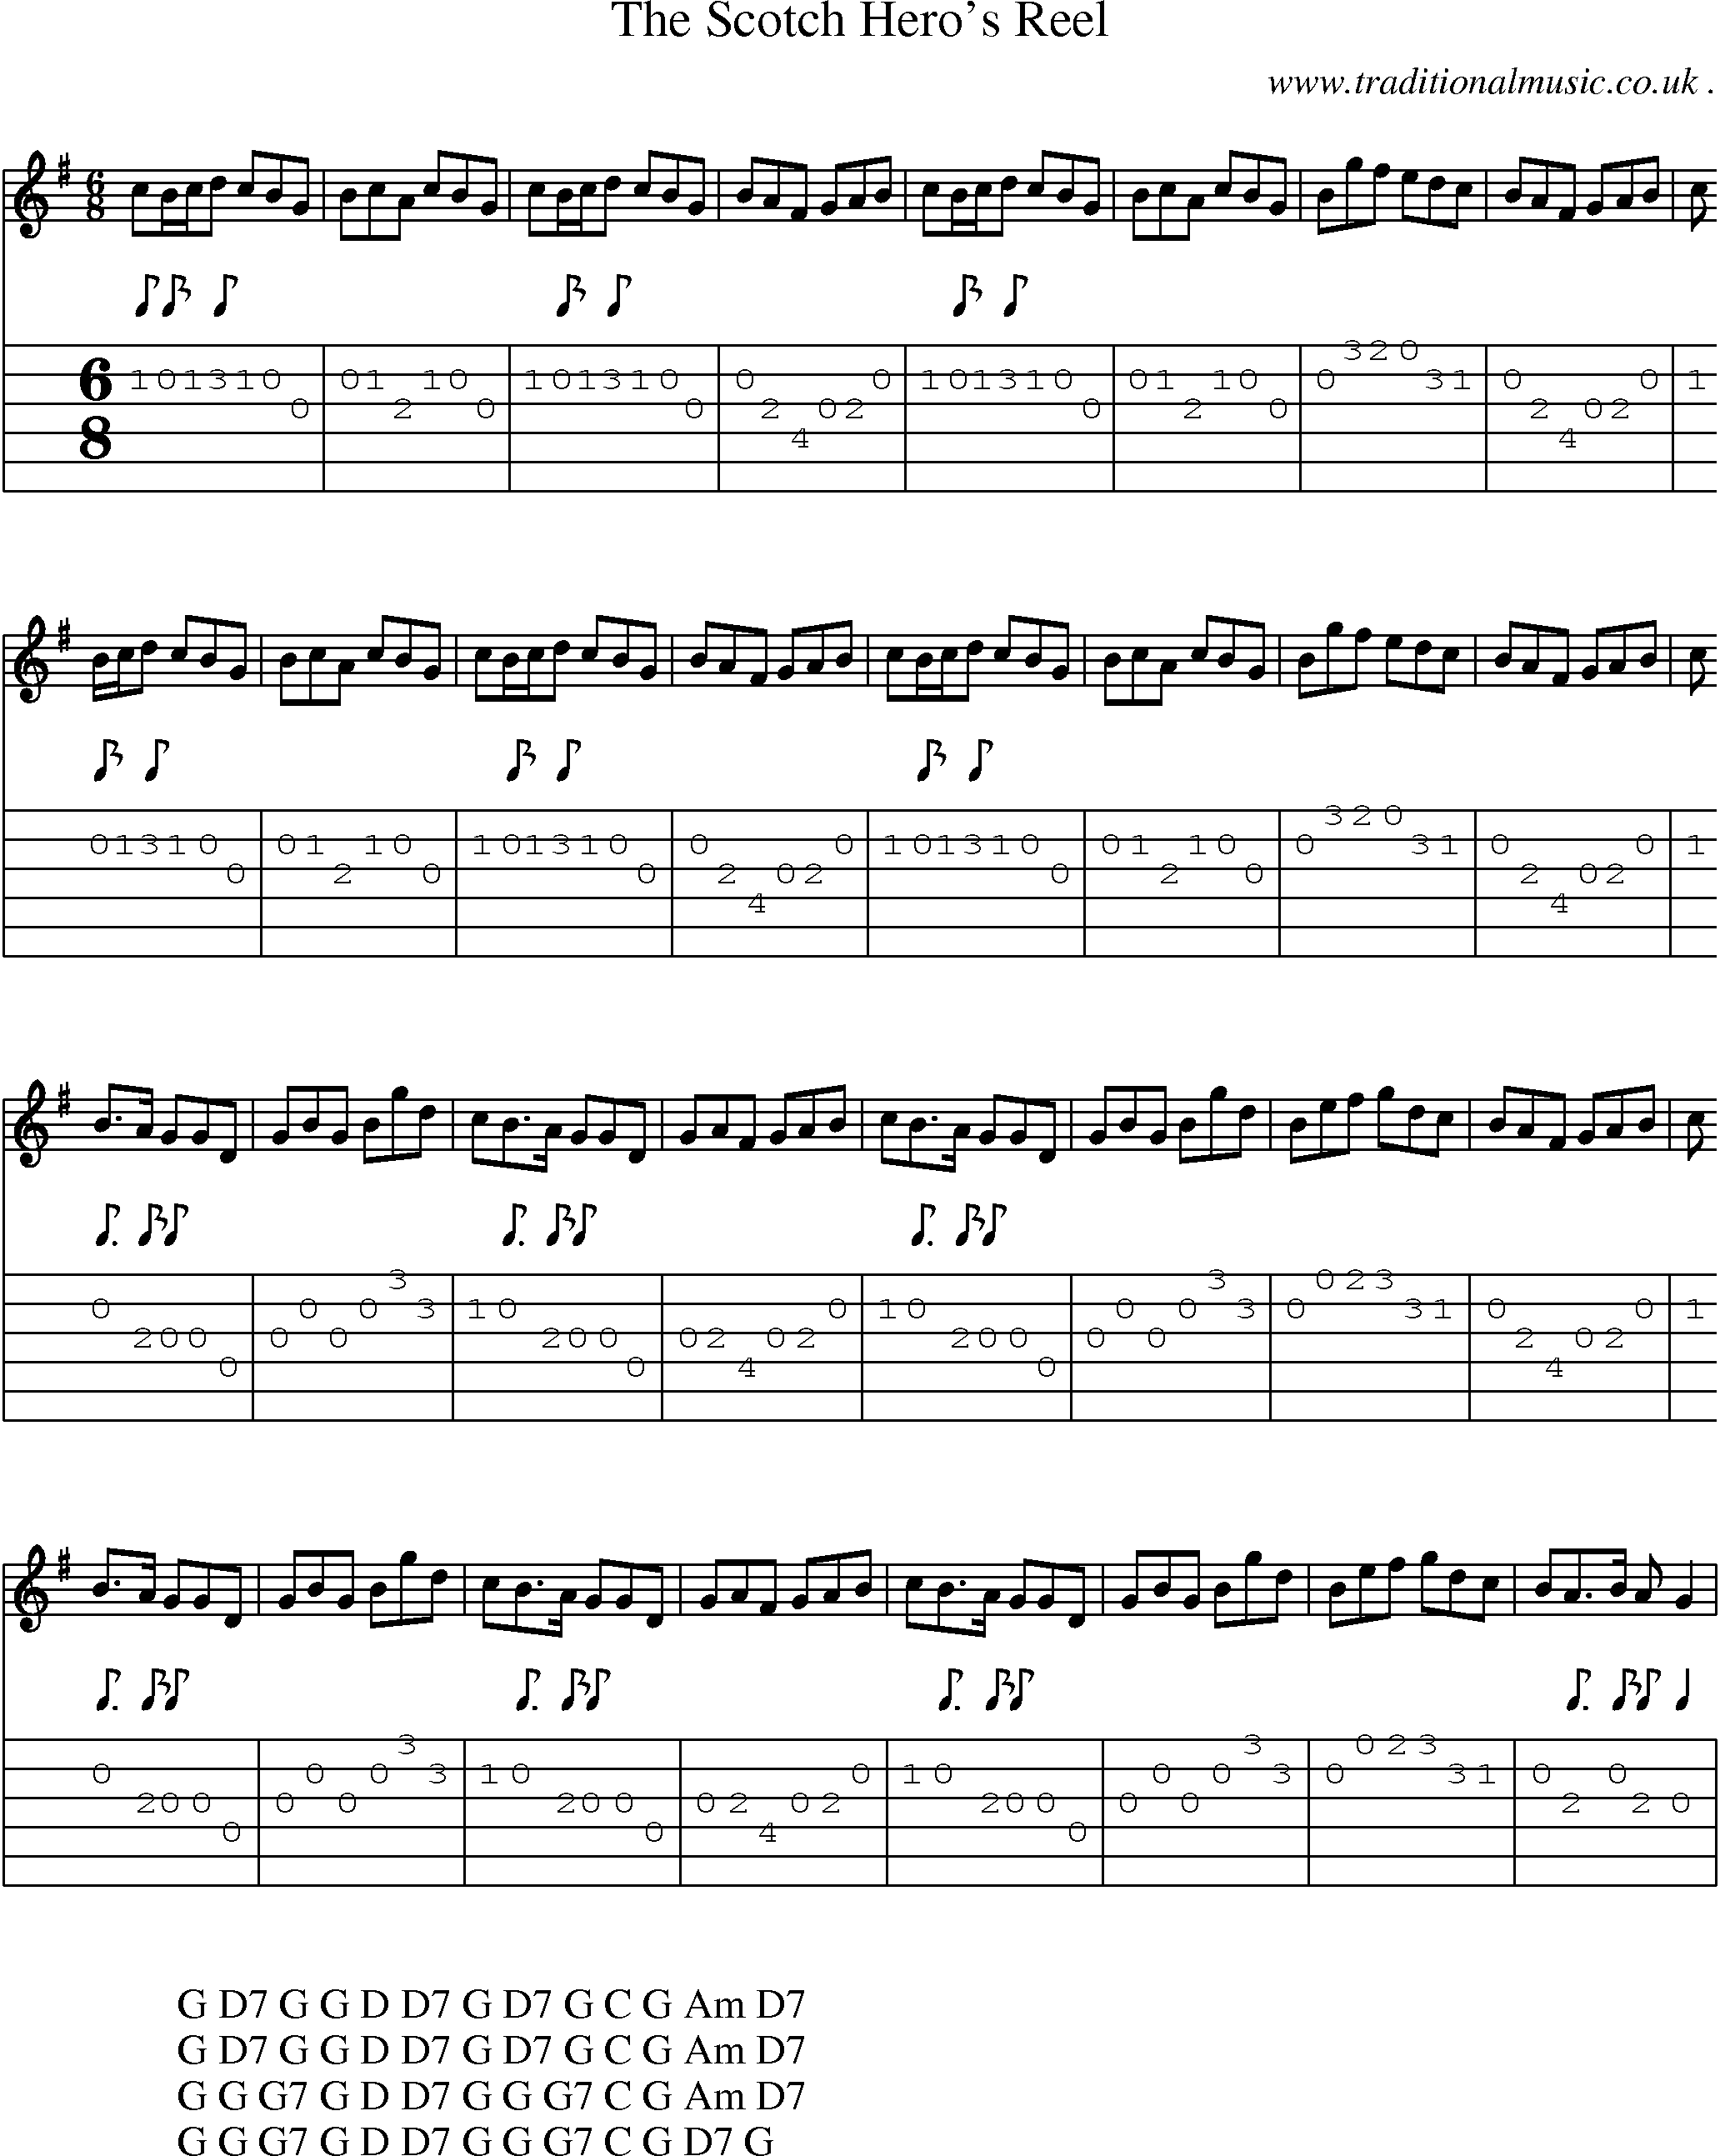 Sheet-Music and Guitar Tabs for The Scotch Heros Reel